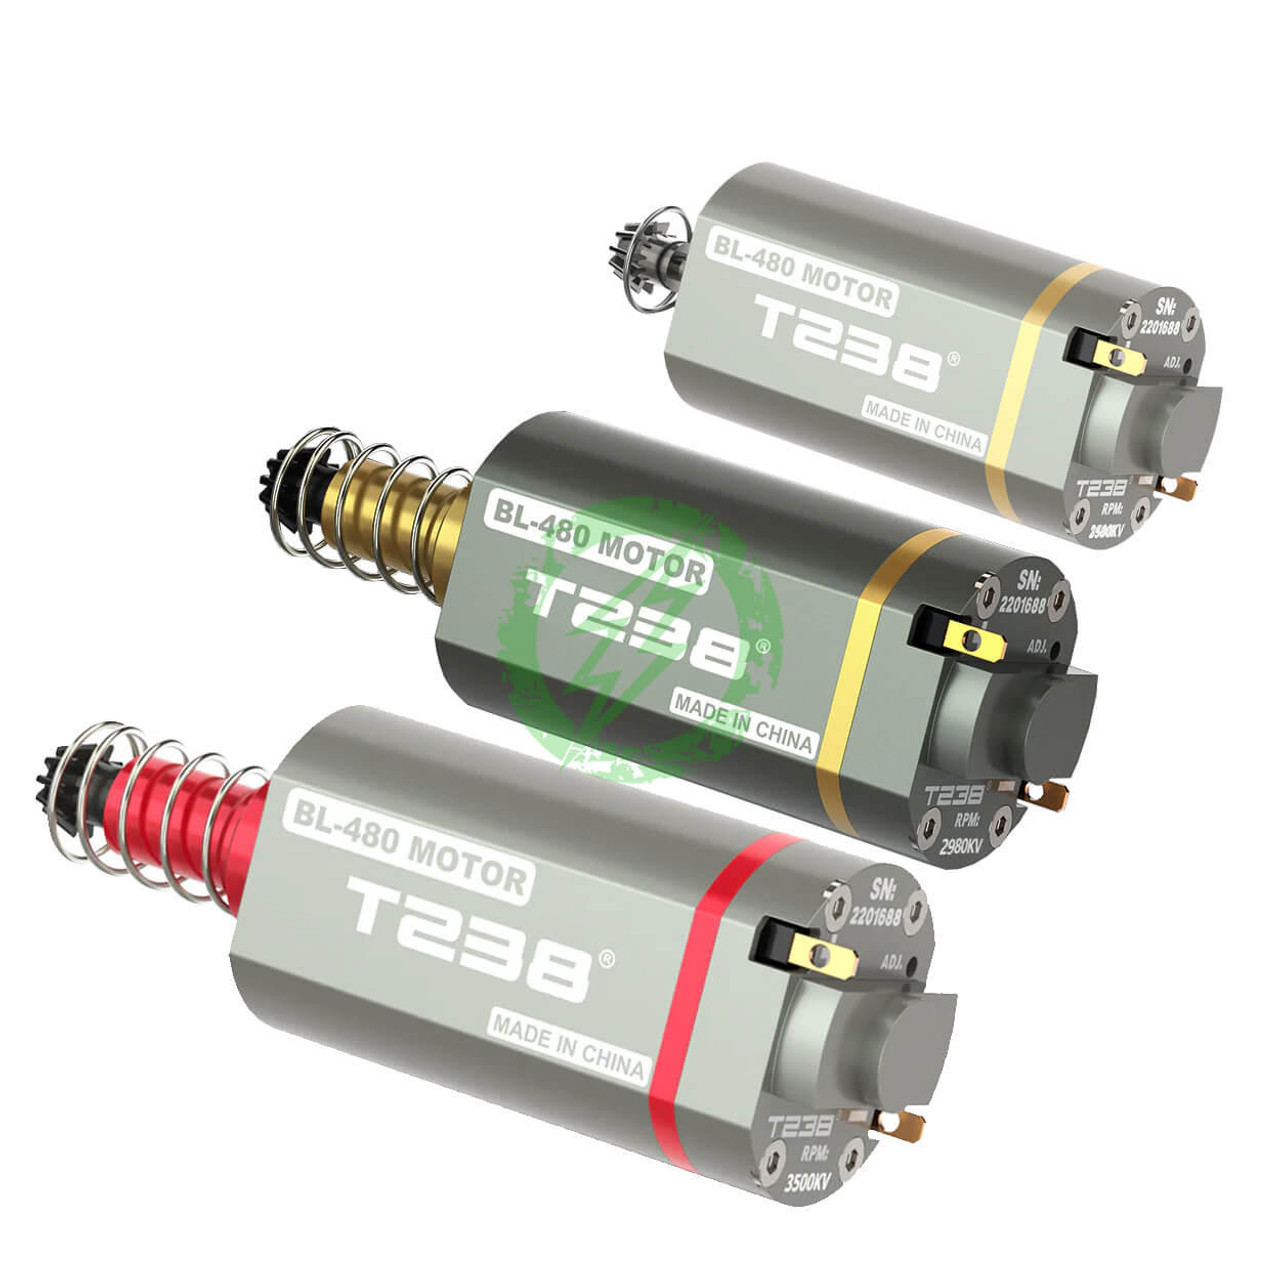  T238 Brushless Motor | RPM and Length Options 